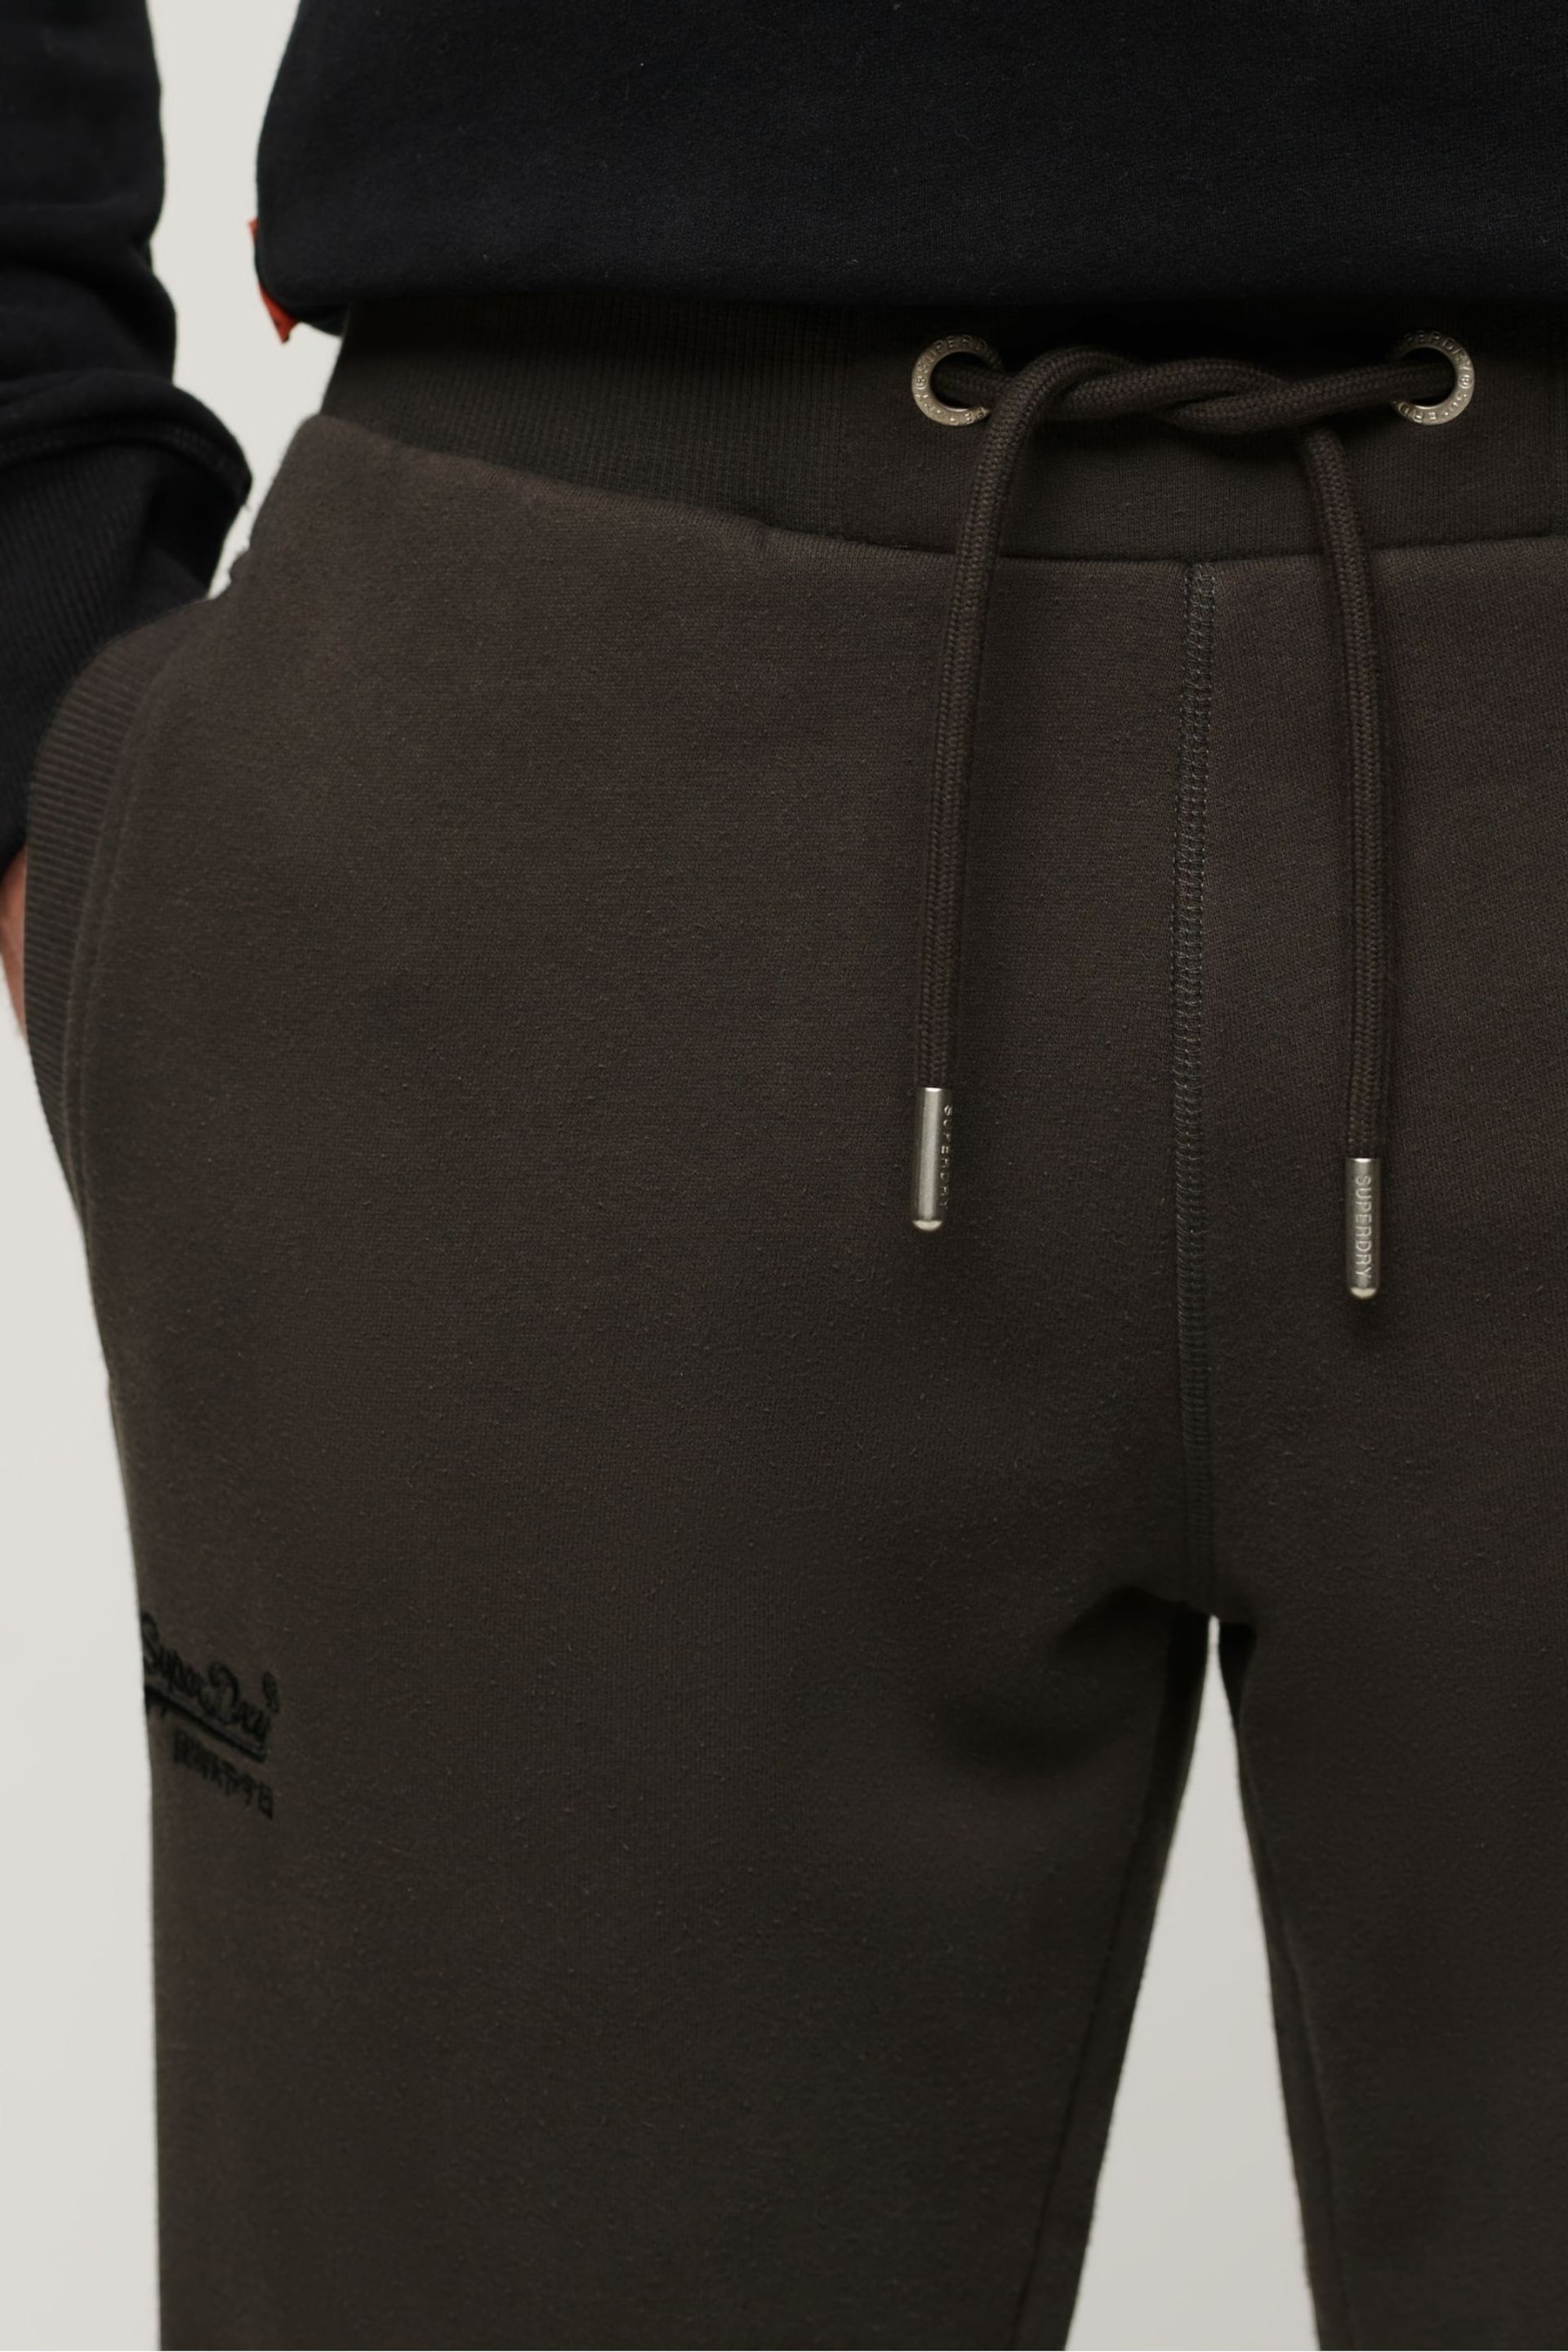 Superdry Black Essential Logo Joggers - Image 4 of 7